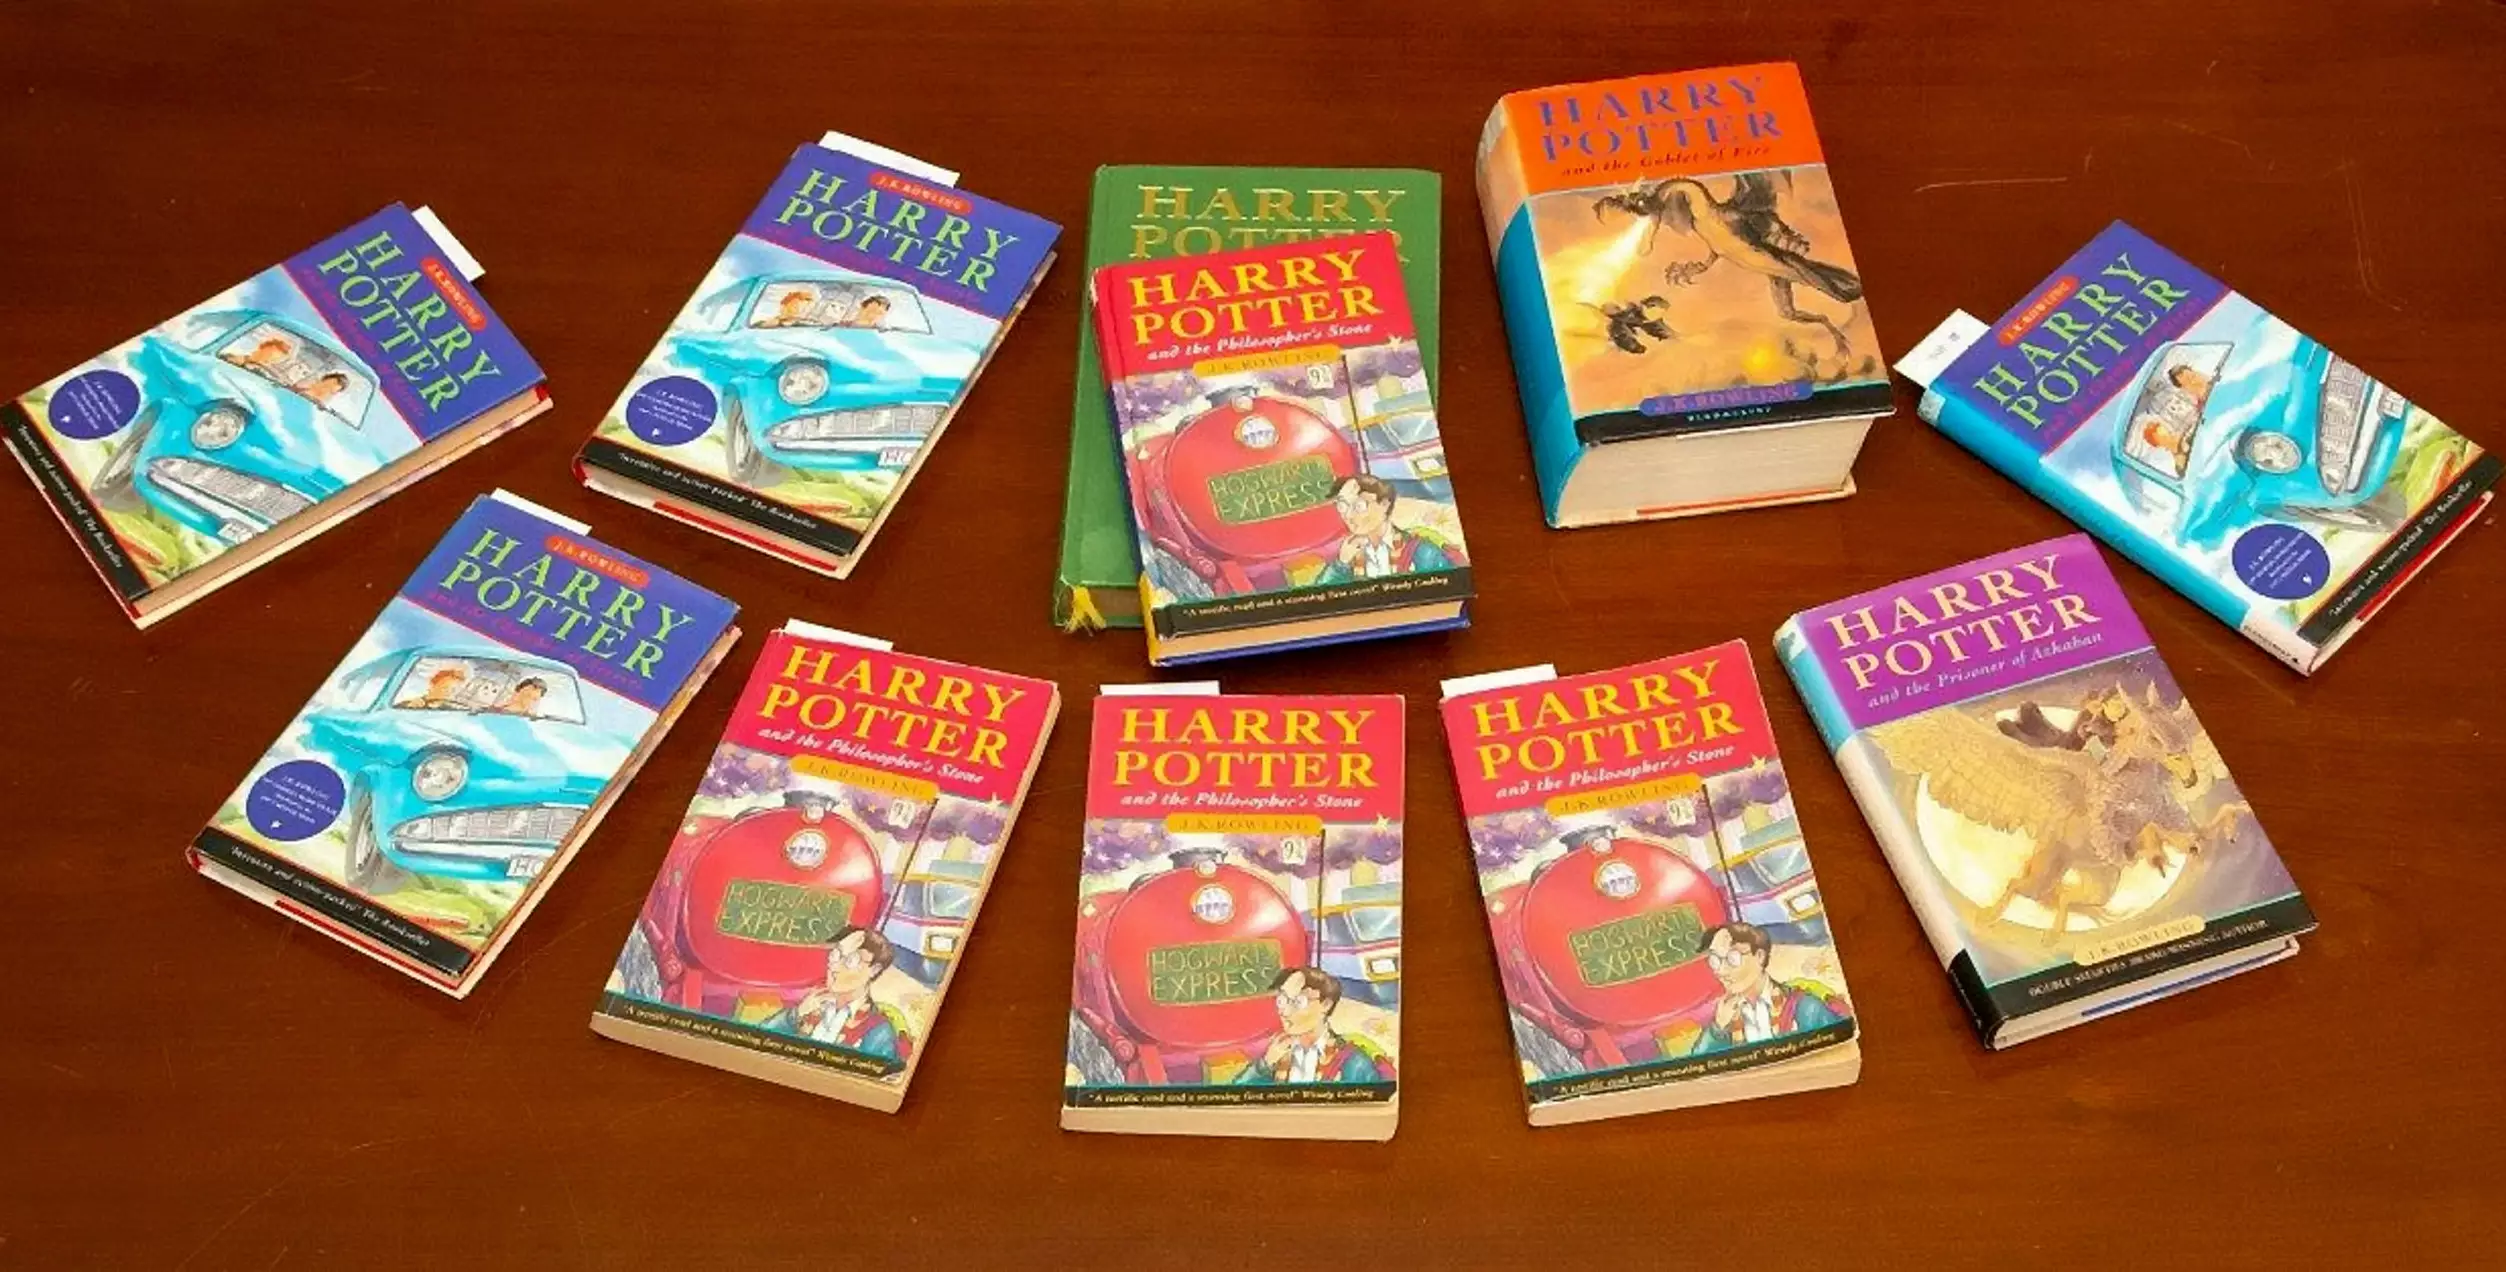 Do you have a valuable Harry Potter book stashed away?